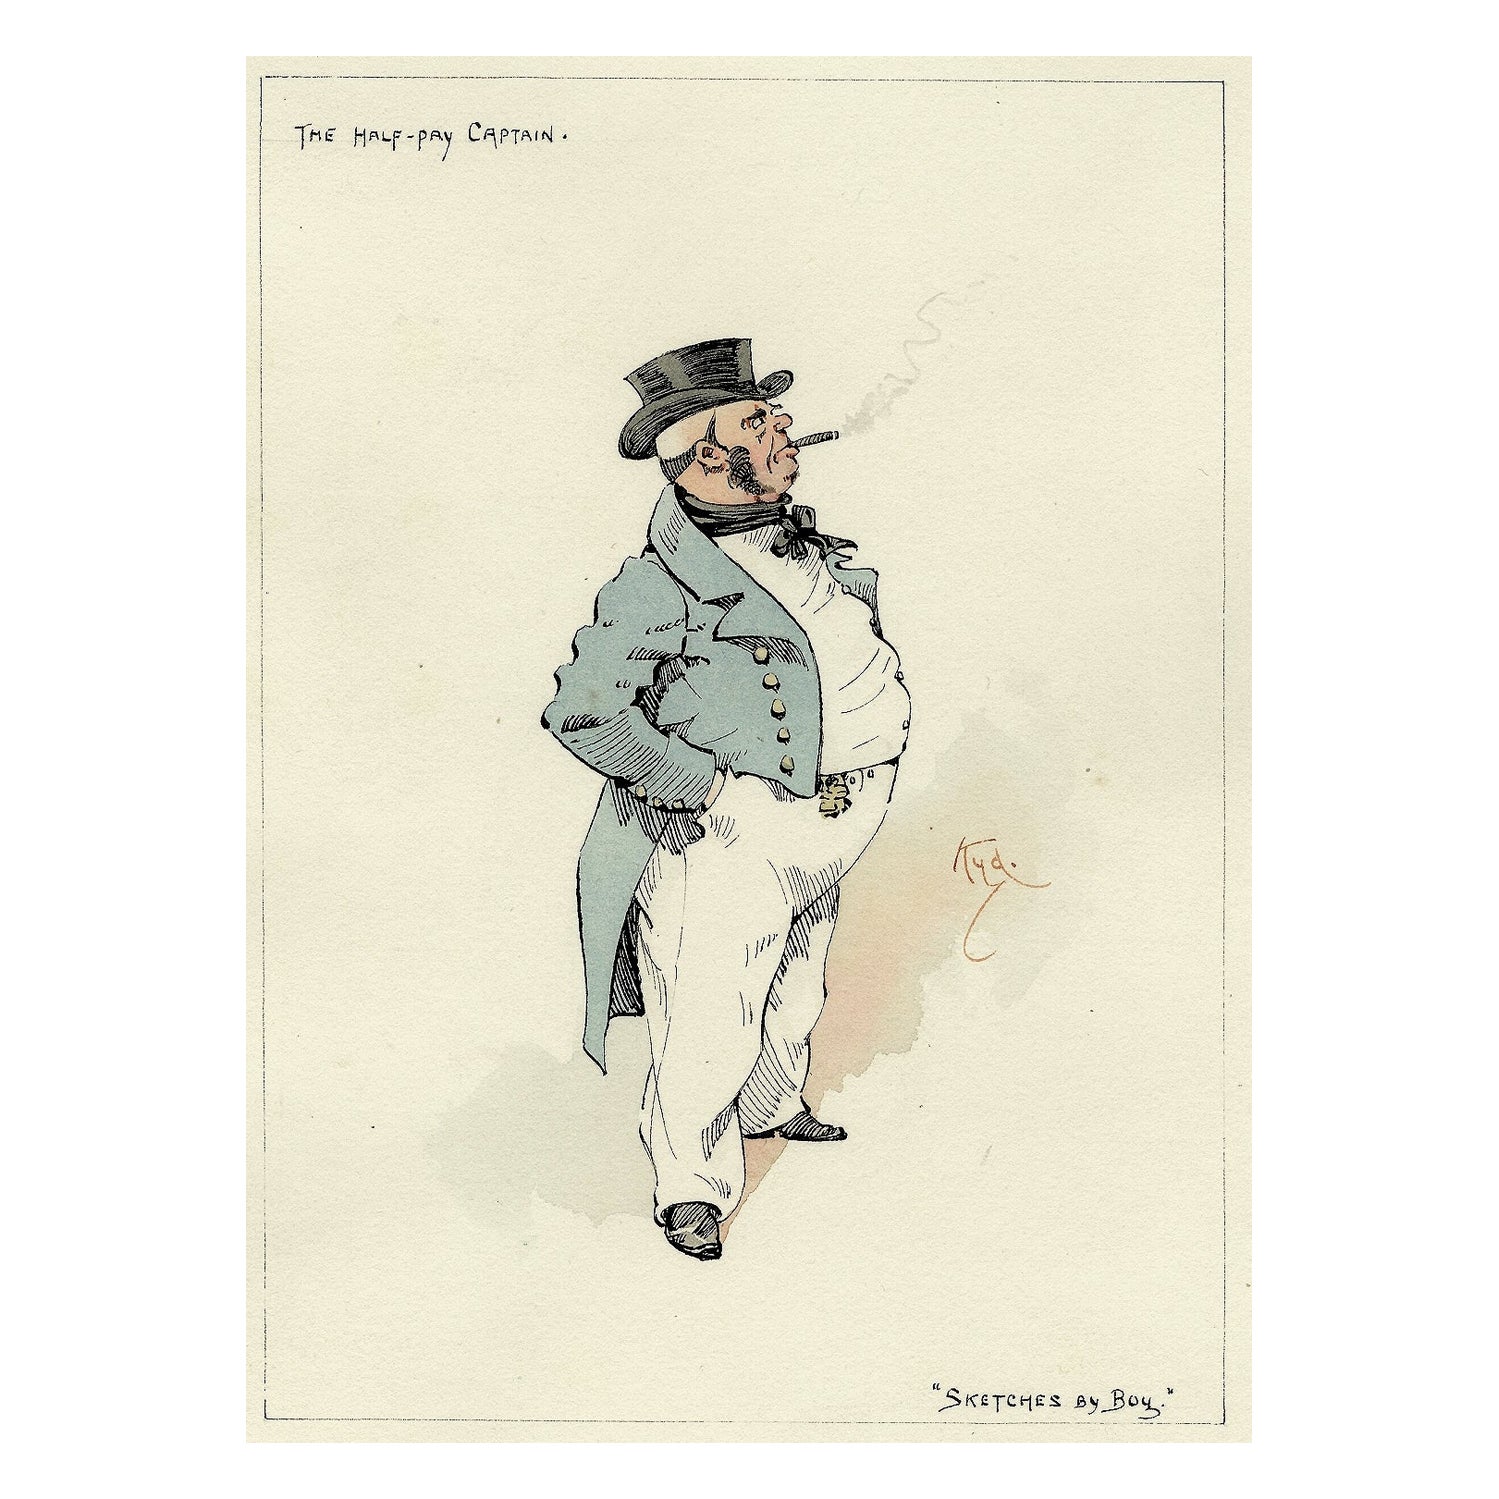 (KYD) - DICKENS - The Half-Pay Captain (from Sketches By Boz) - ORIGINAL SKETCH For Sale